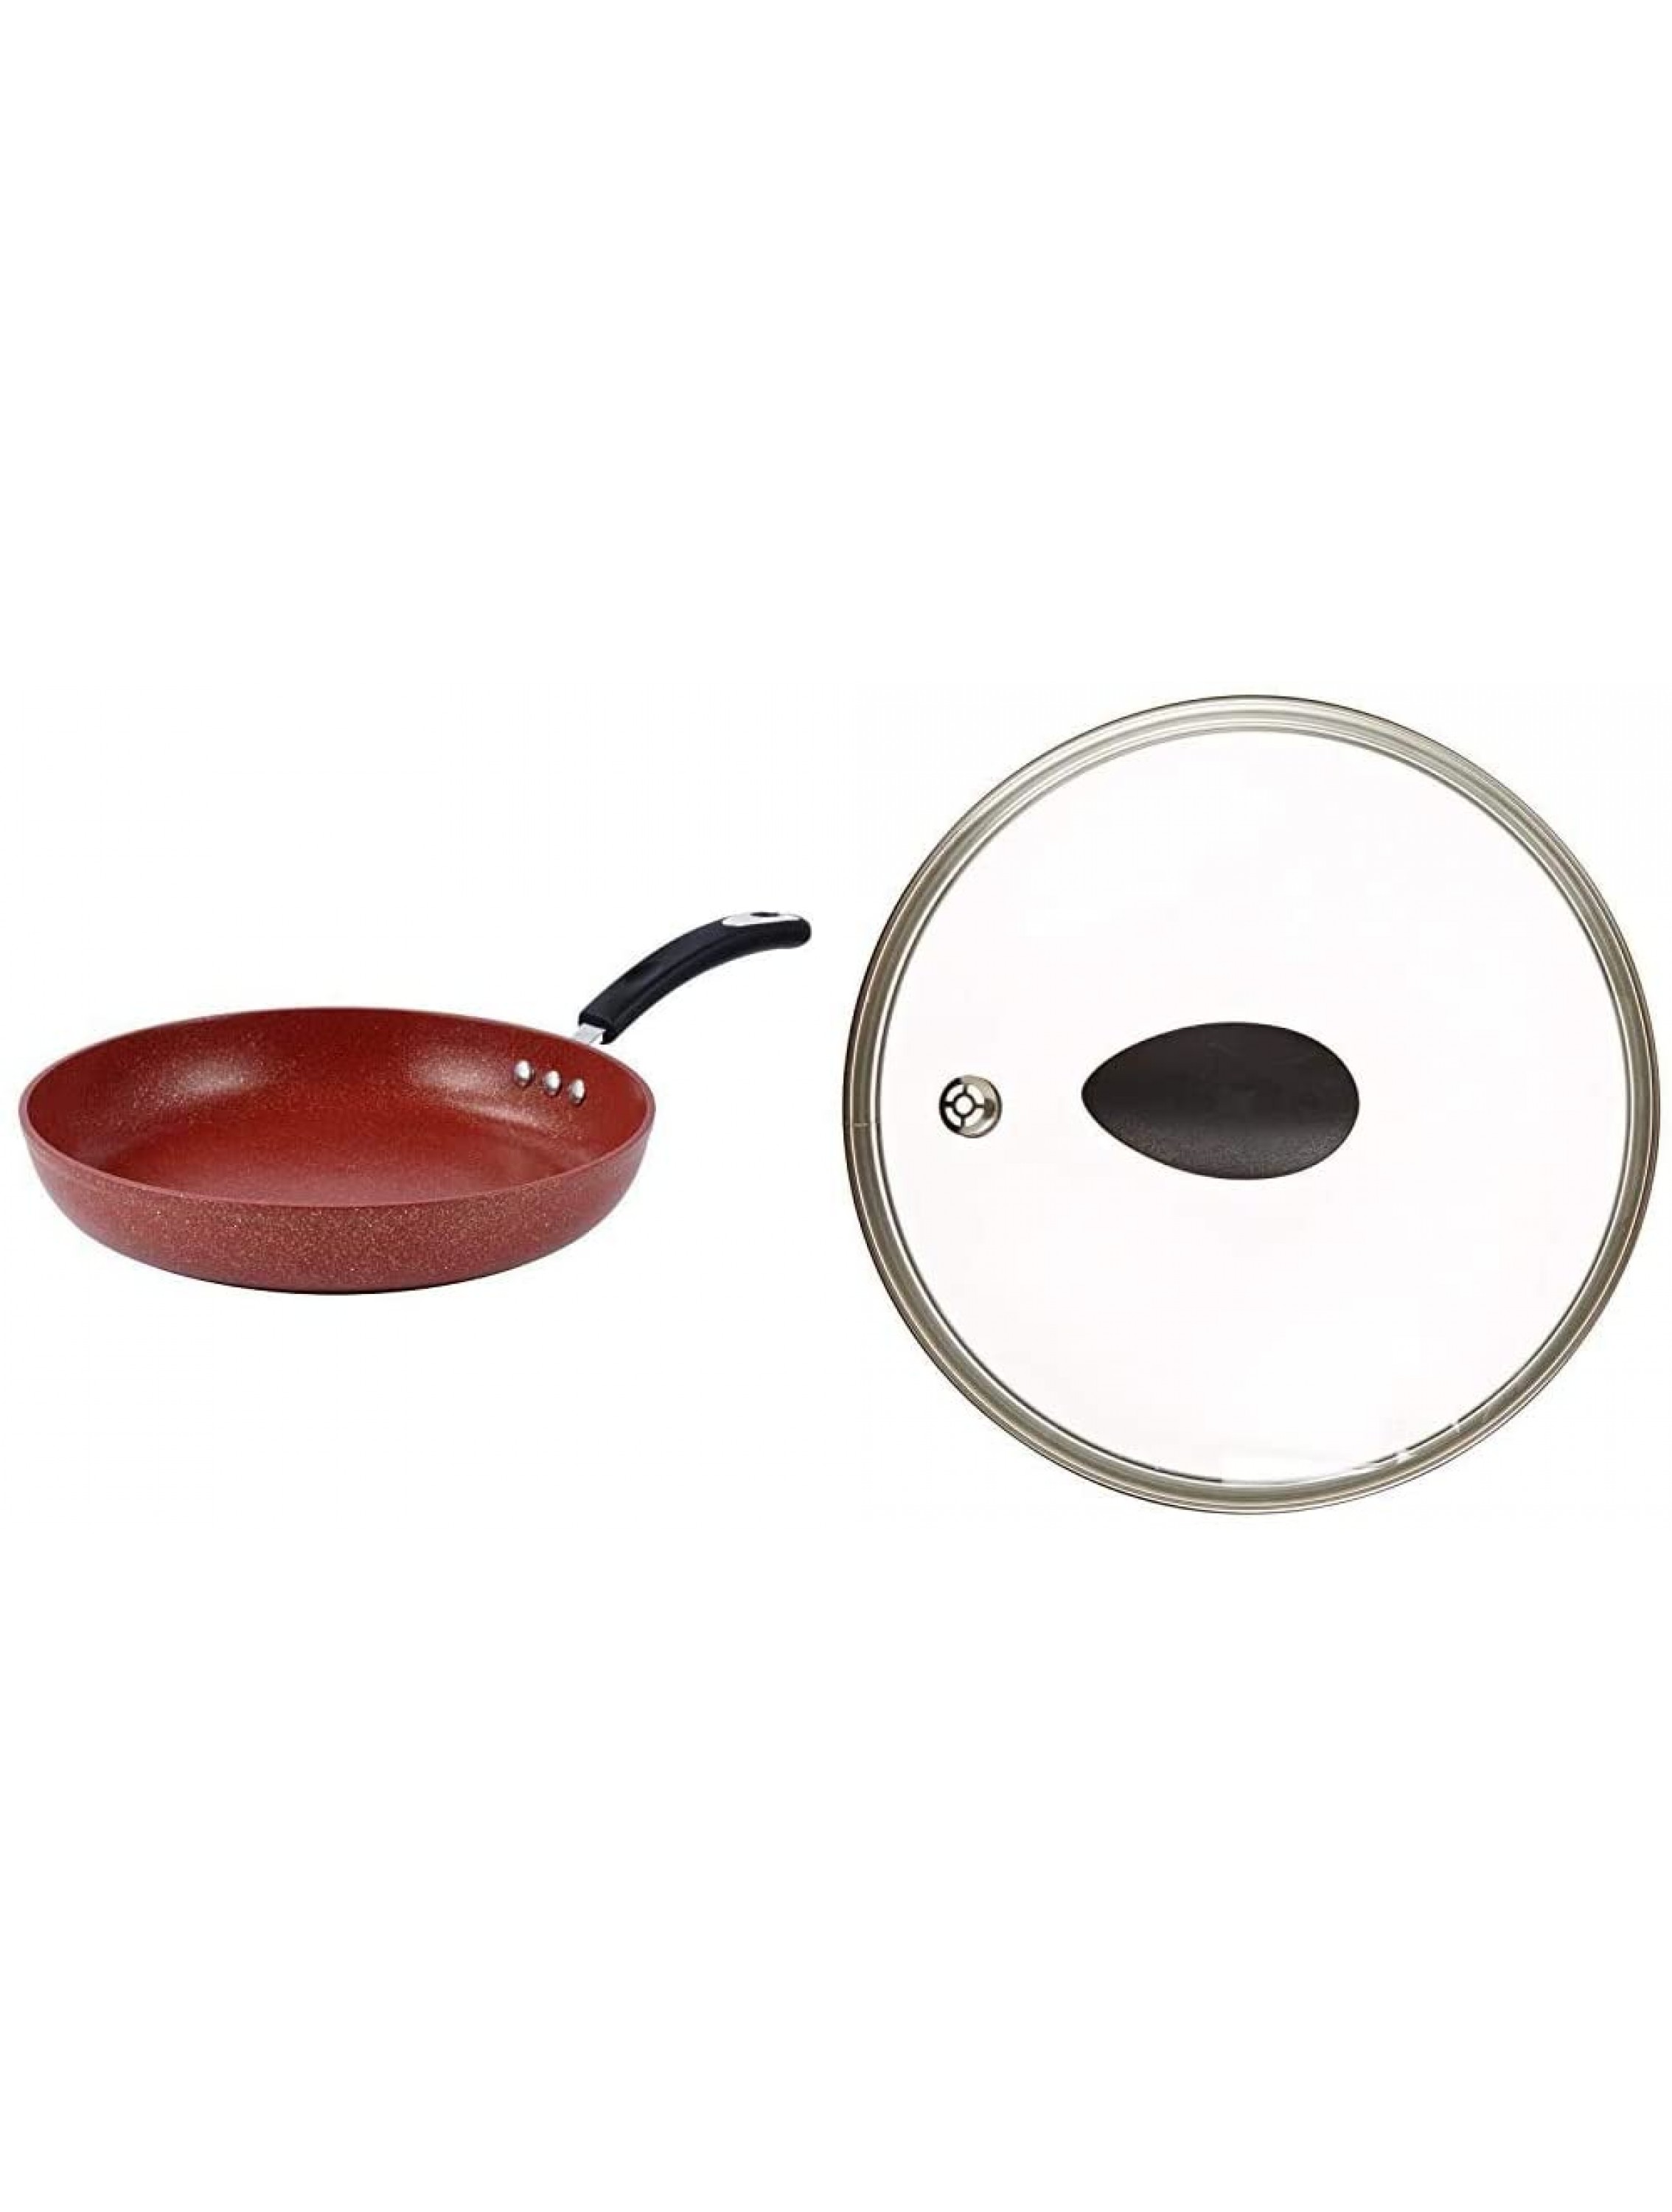 10 Stone Earth Frying Pan and Lid Set by Ozeri with 100% APEO & PFOA-Free Stone-Derived Non-Stick Coating from Germany - BUVNGQH4W